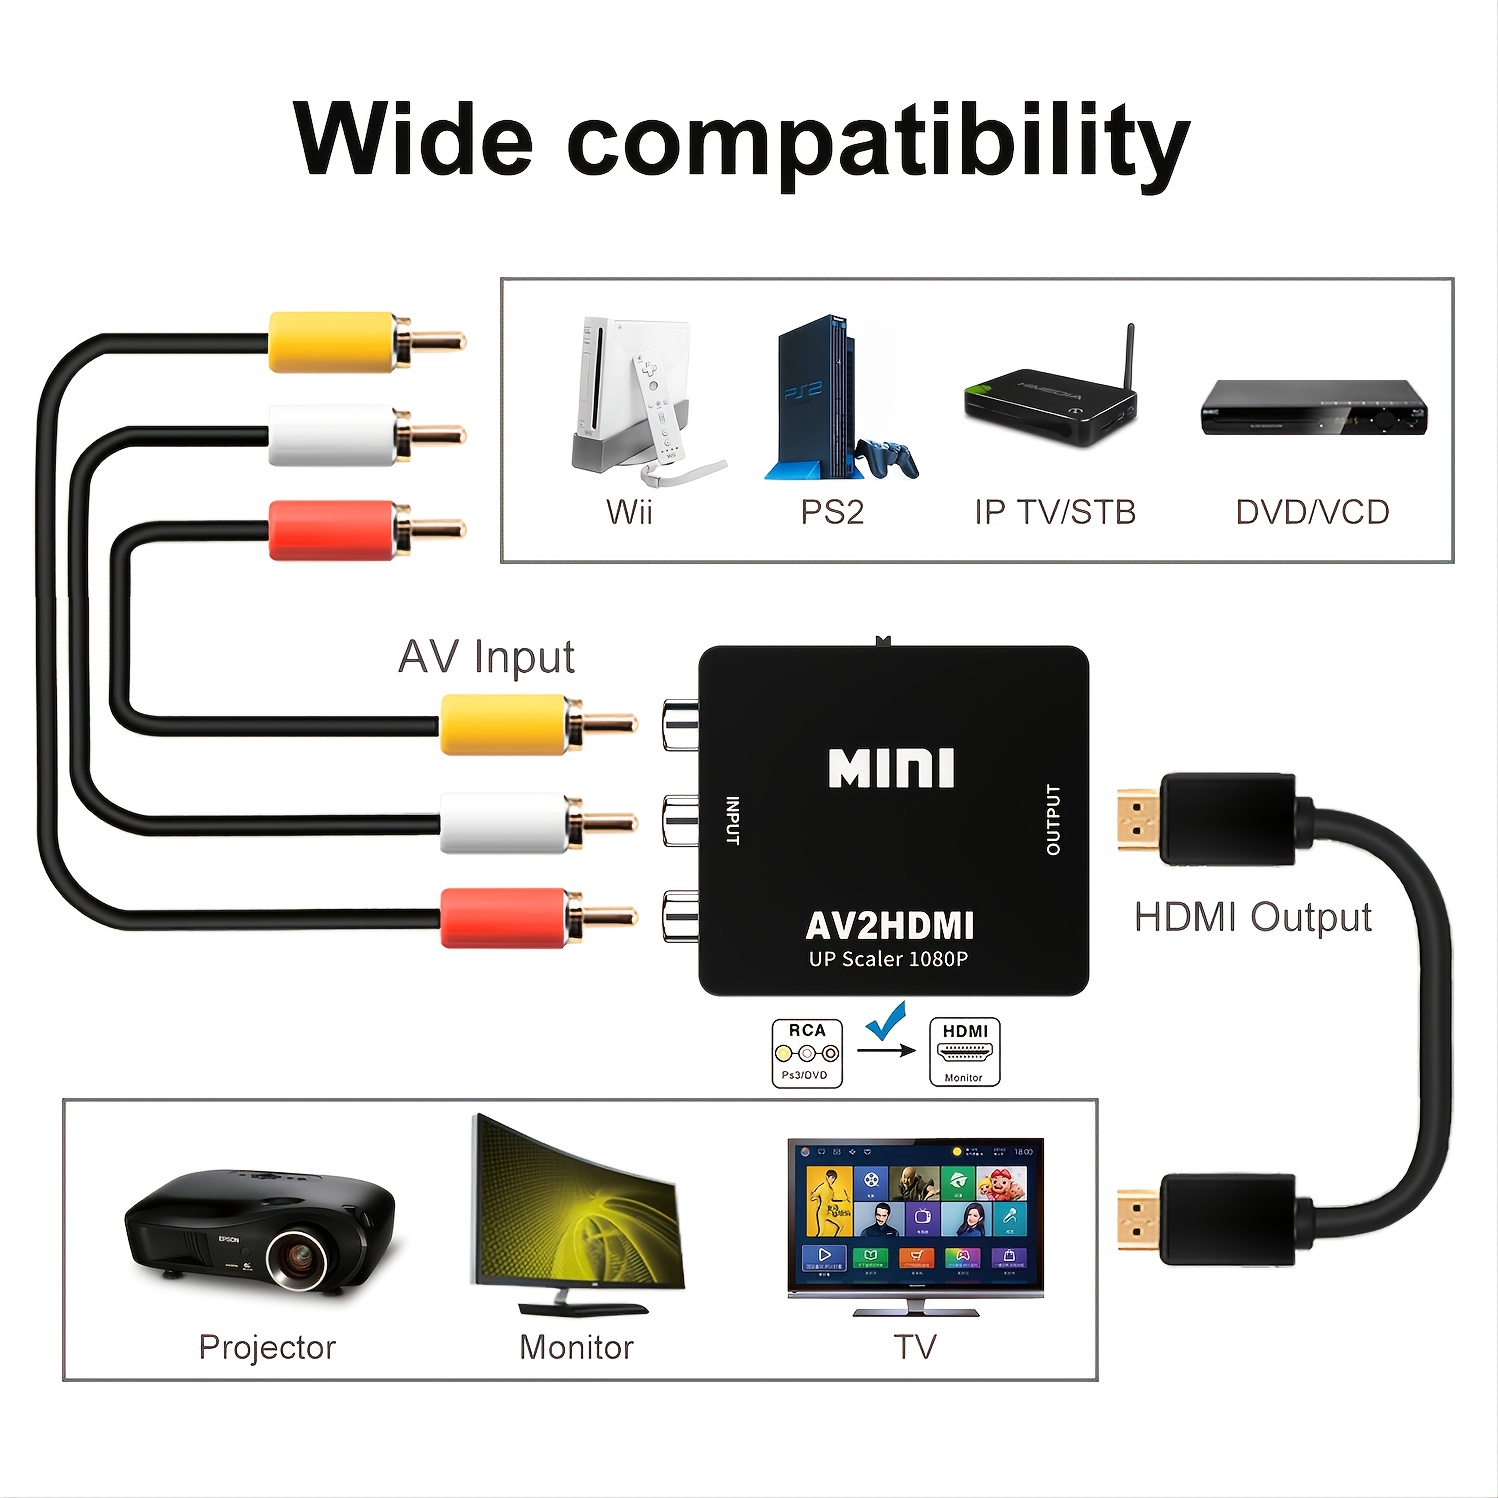 HDMI to AV Converter for Old TV, HDMI to RCA Converter, HDMI to AV Adapter  for PS3, HDMI to Composite for Old TV Supports PAL/NTSC, 1080P, Roku, PC,  STB, VHS, VCR, DVD